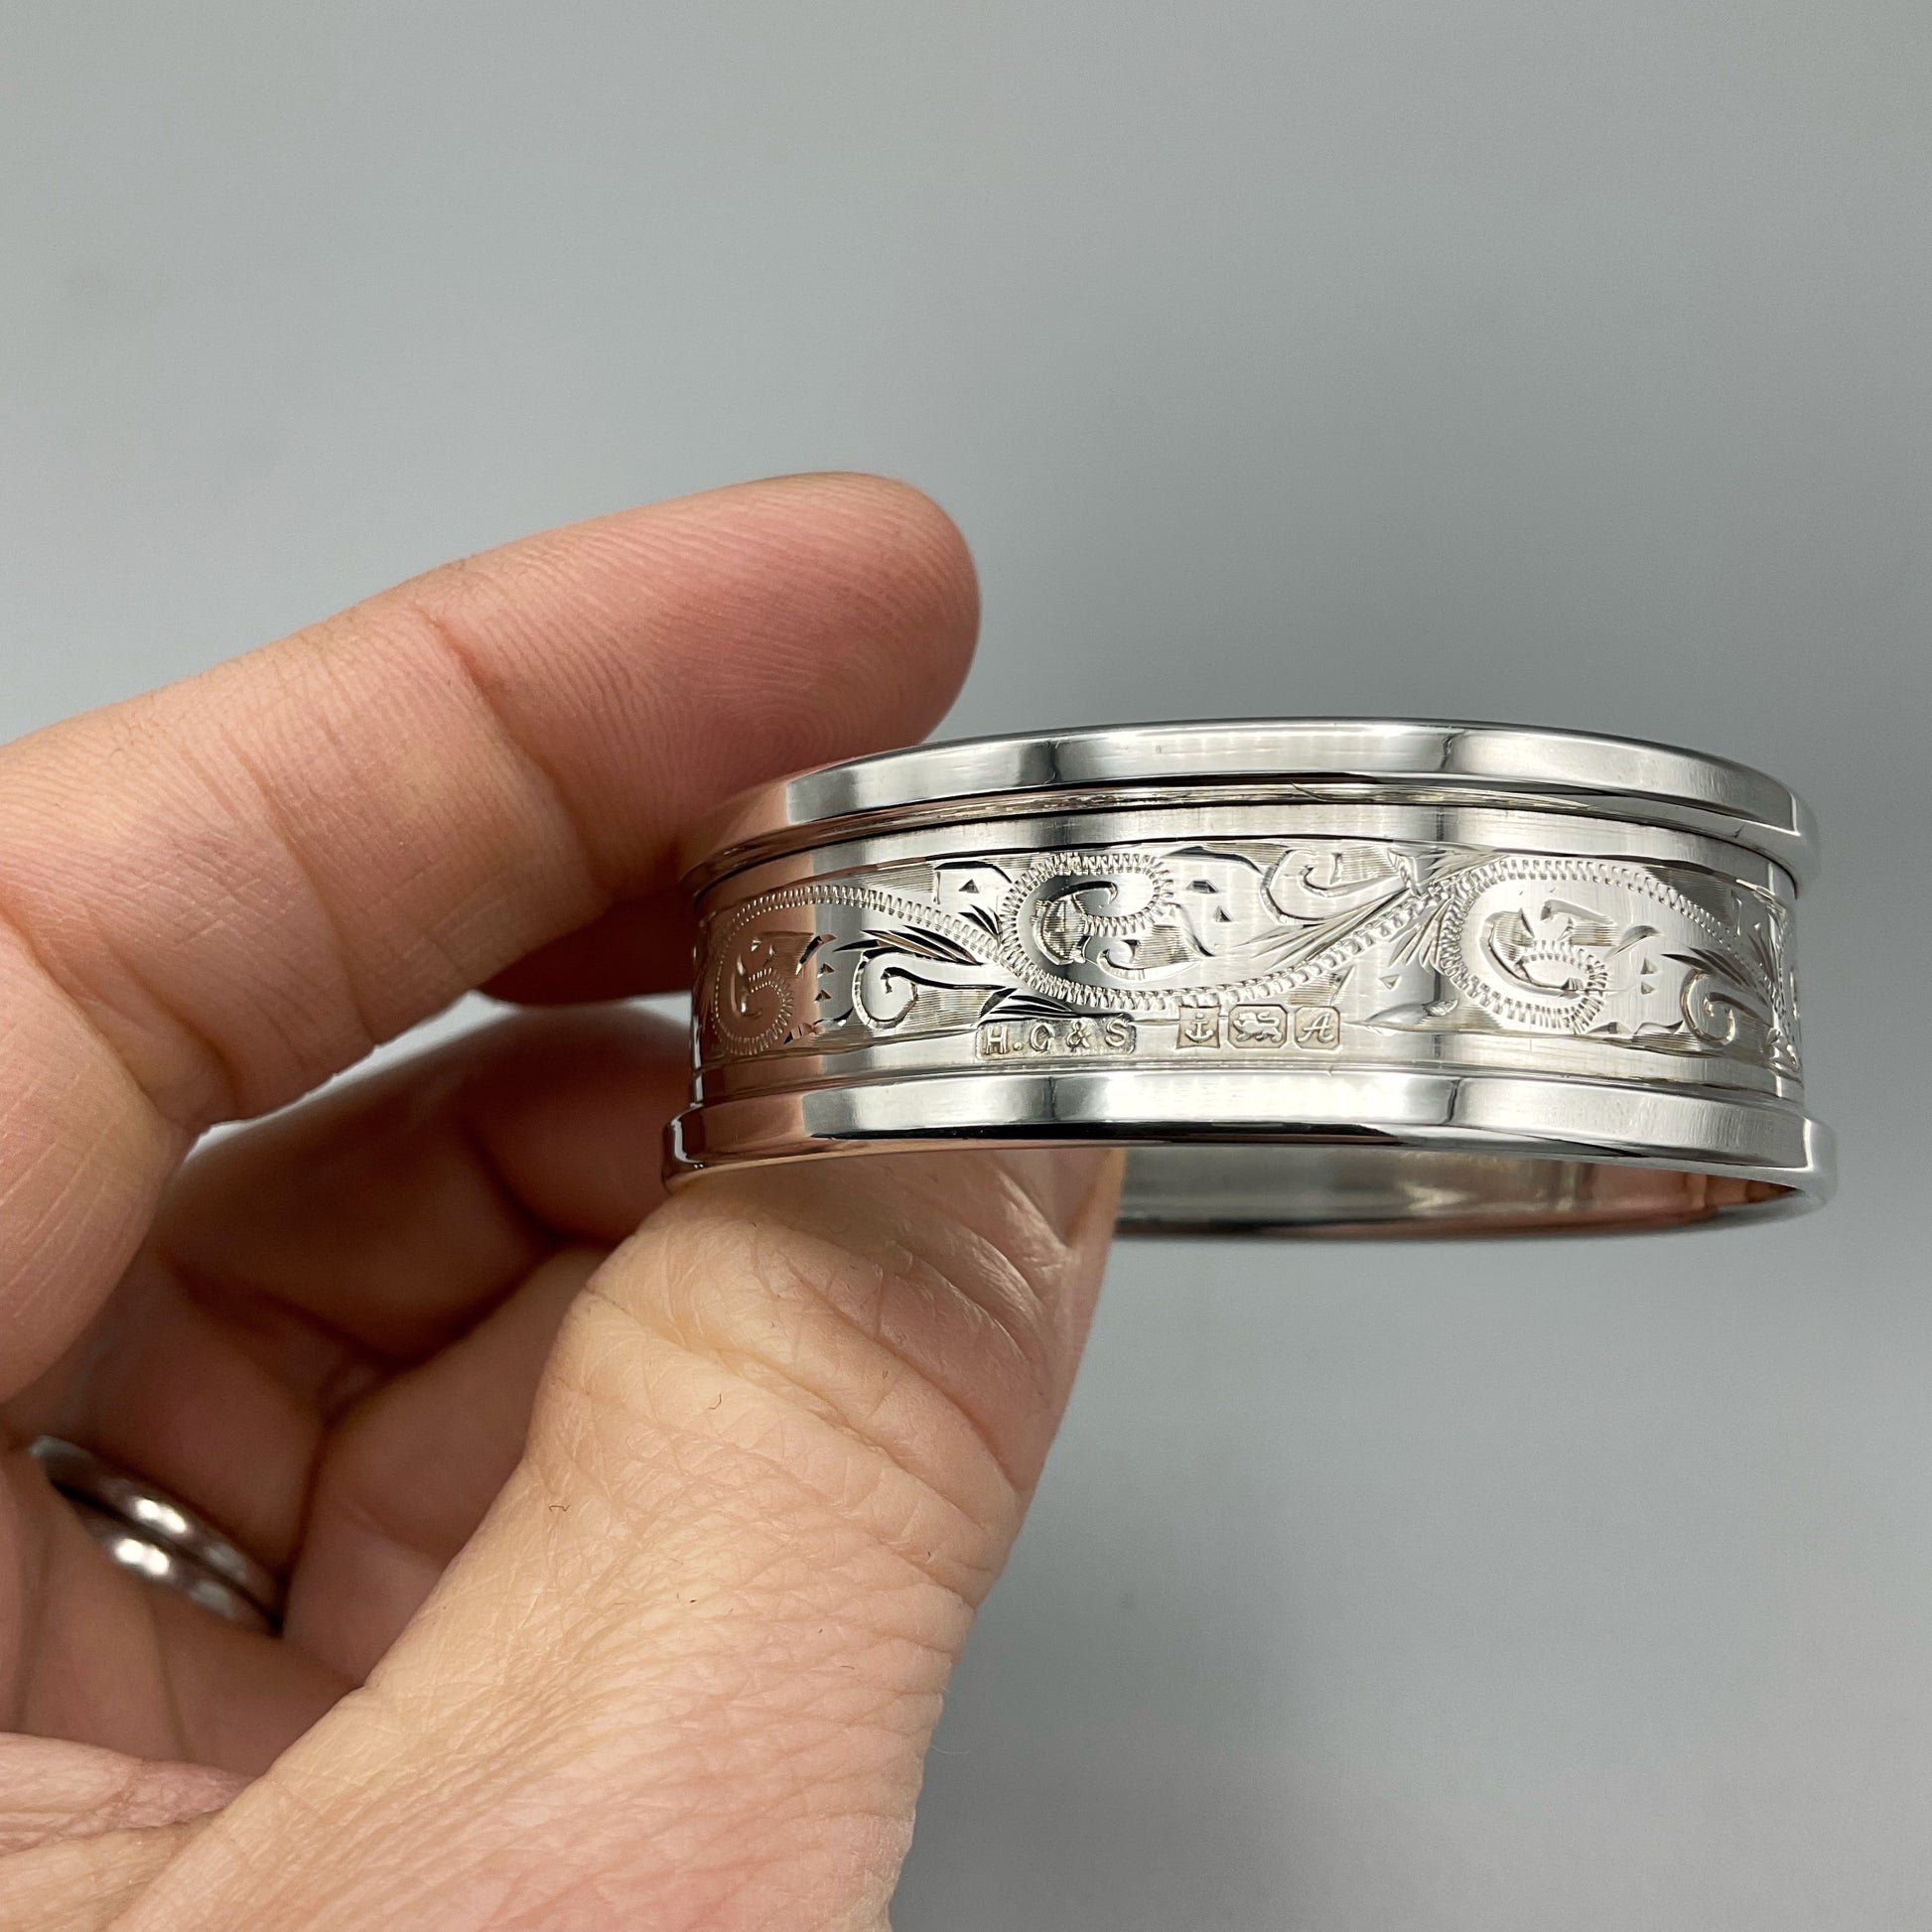 Engraved silver napkin ring showing the hallmarks and makers marks held in a hand